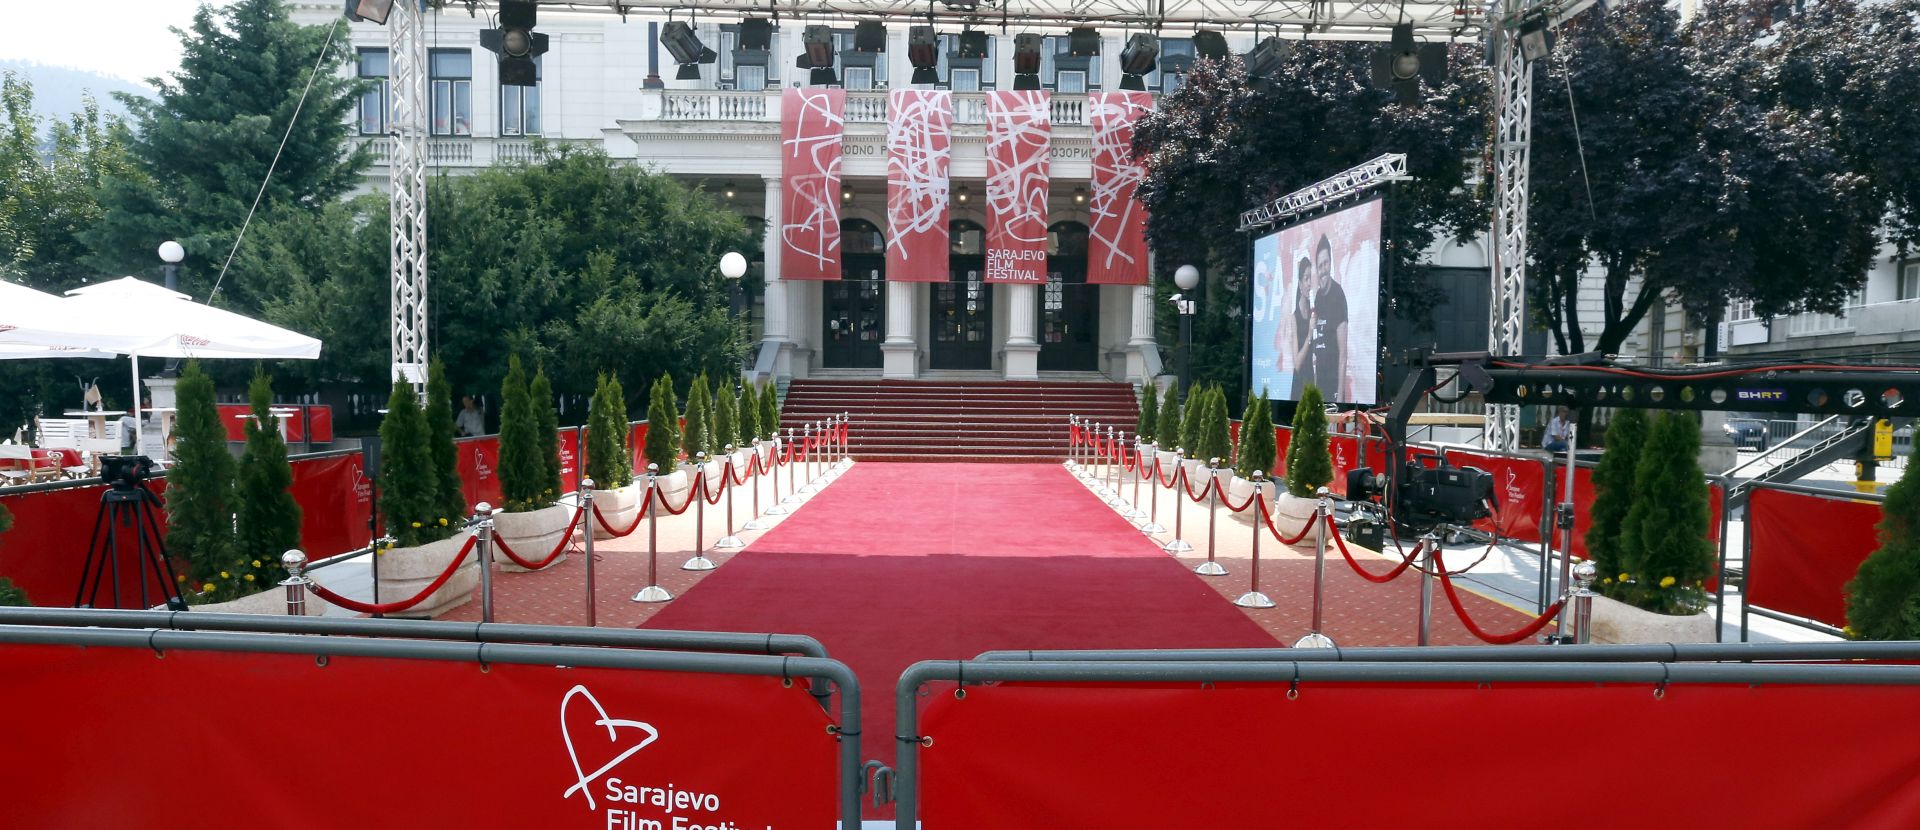 epa06940617 Red carpet ready for guests for the 24th Sarajevo Film Festival, in Sarajevo, Bosnia and Herzegovina, 10 August 2018. The festival running from 10 to 17 August2018, will present 266 films.  EPA/FEHIM DEMIR